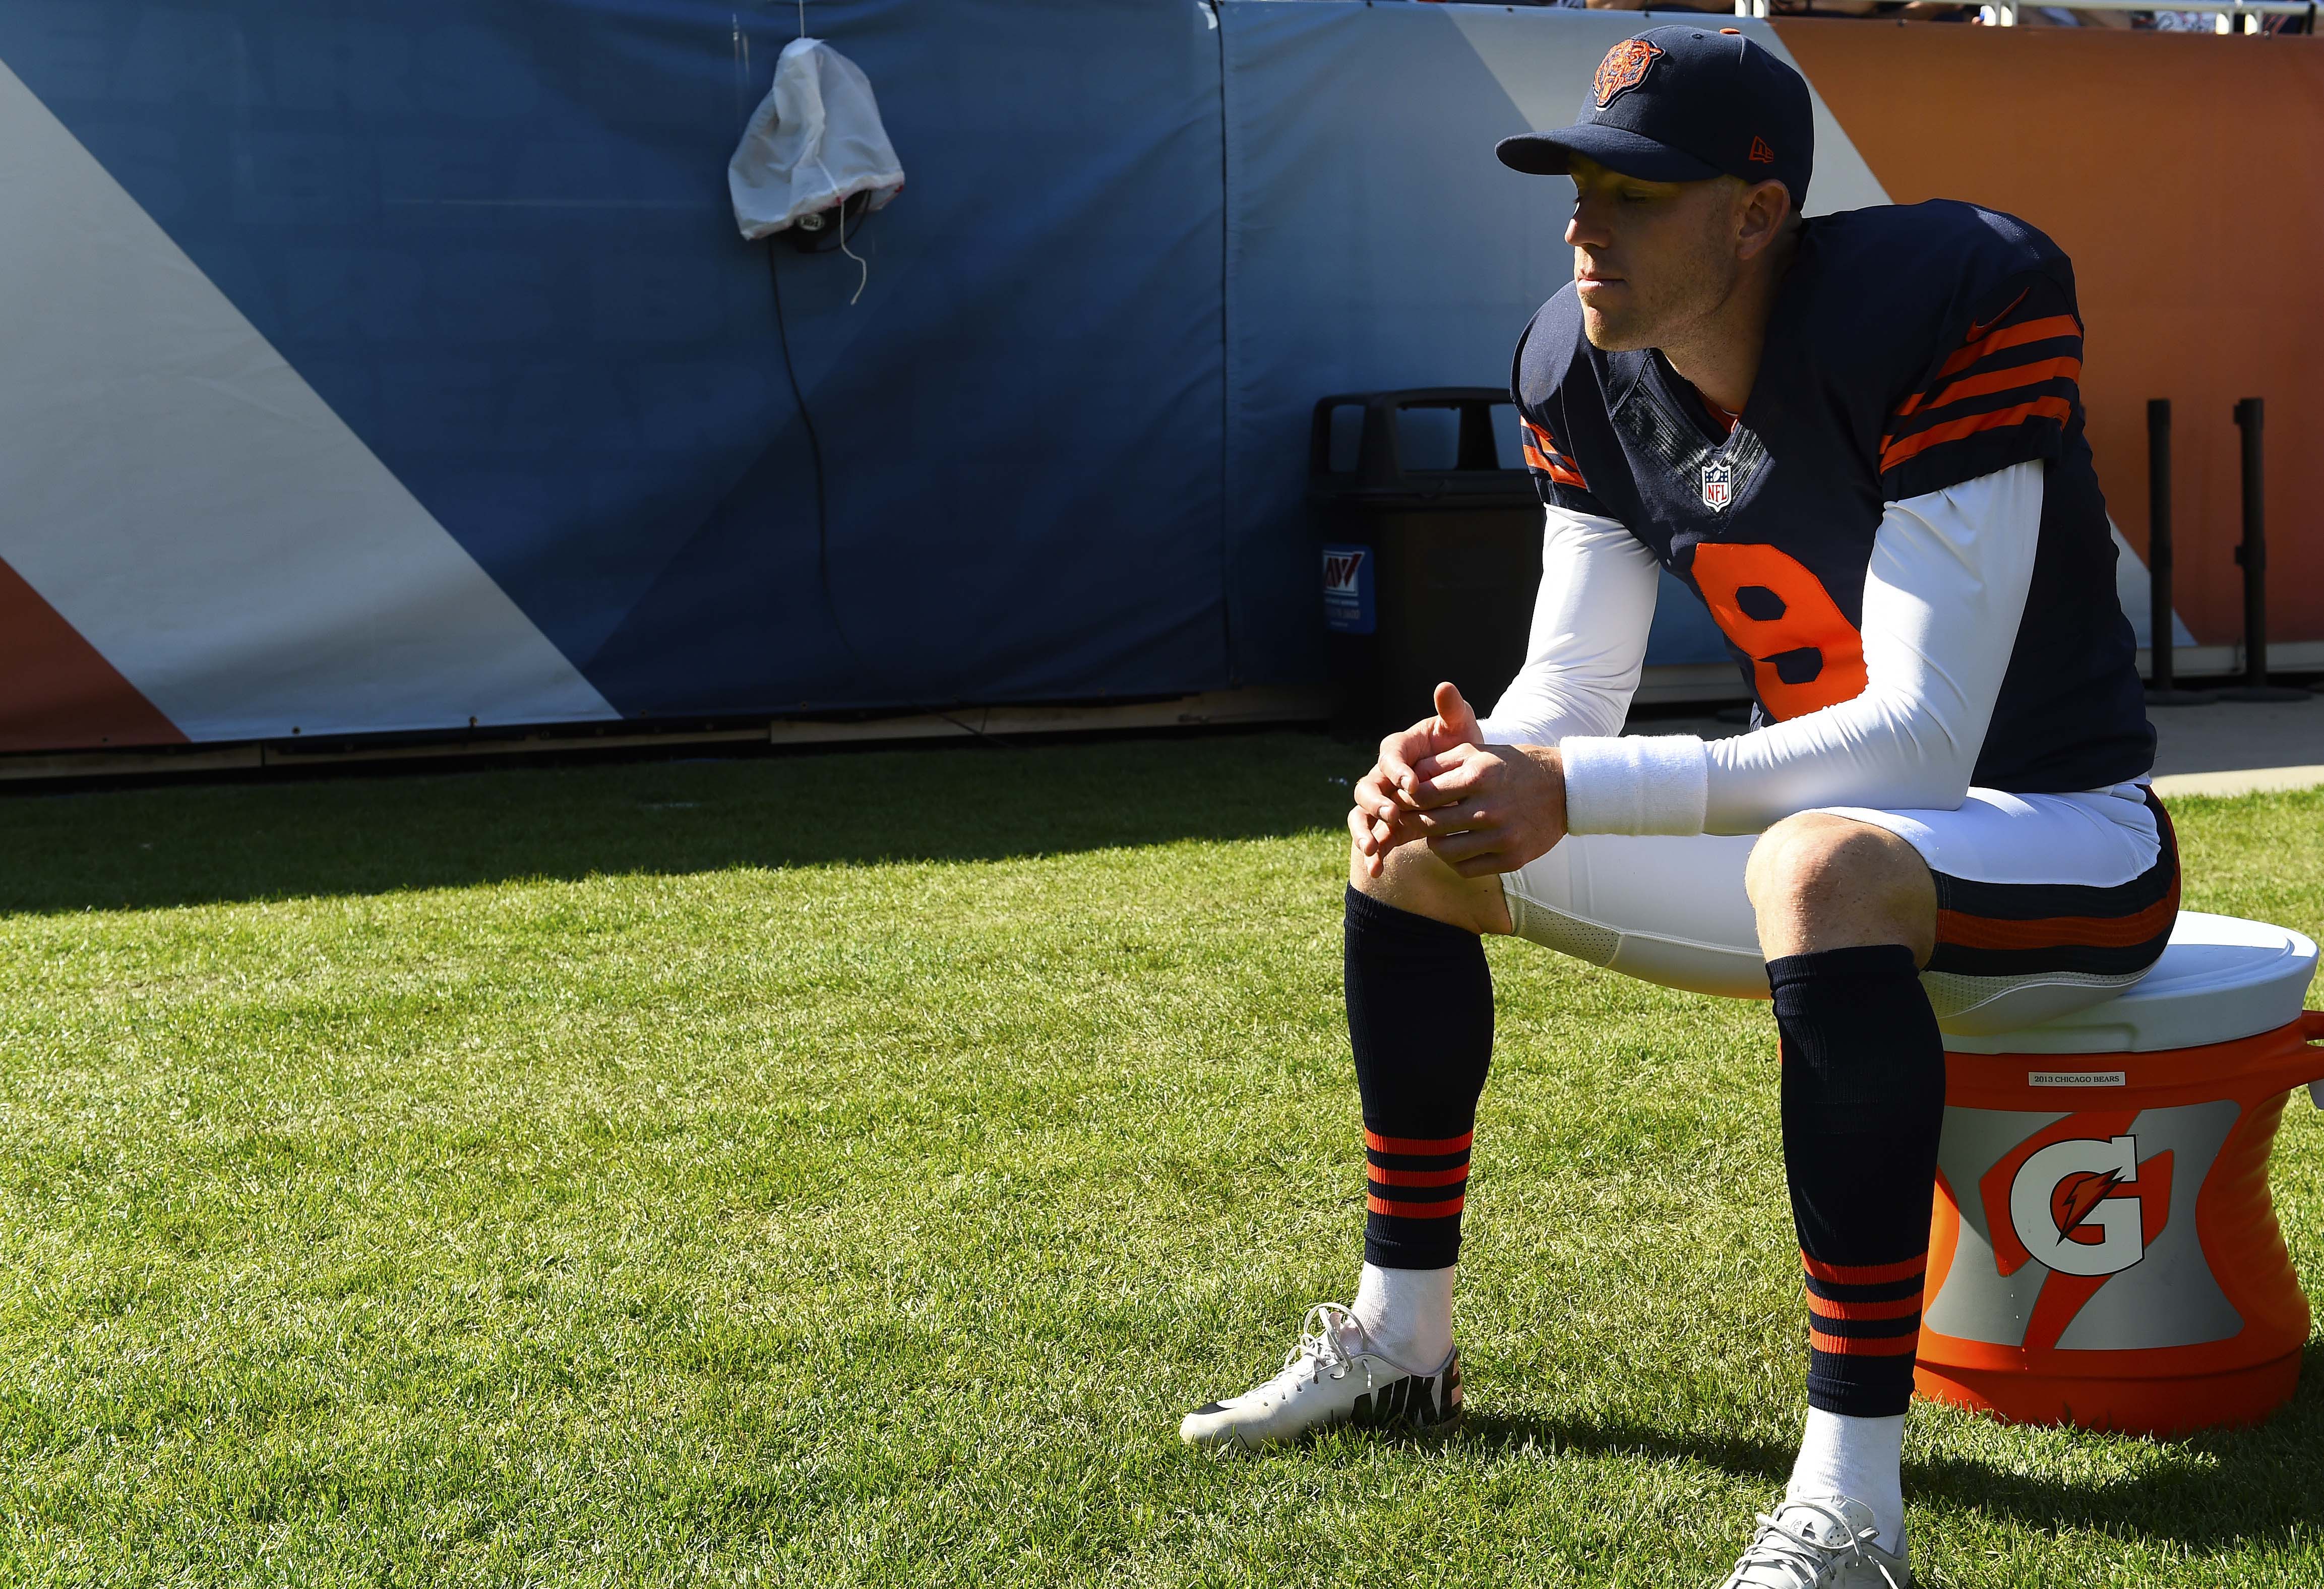 Robbie Gould is a kicker, but surely he was bummed about the lack of punts. (USA TODAY Sports Images)